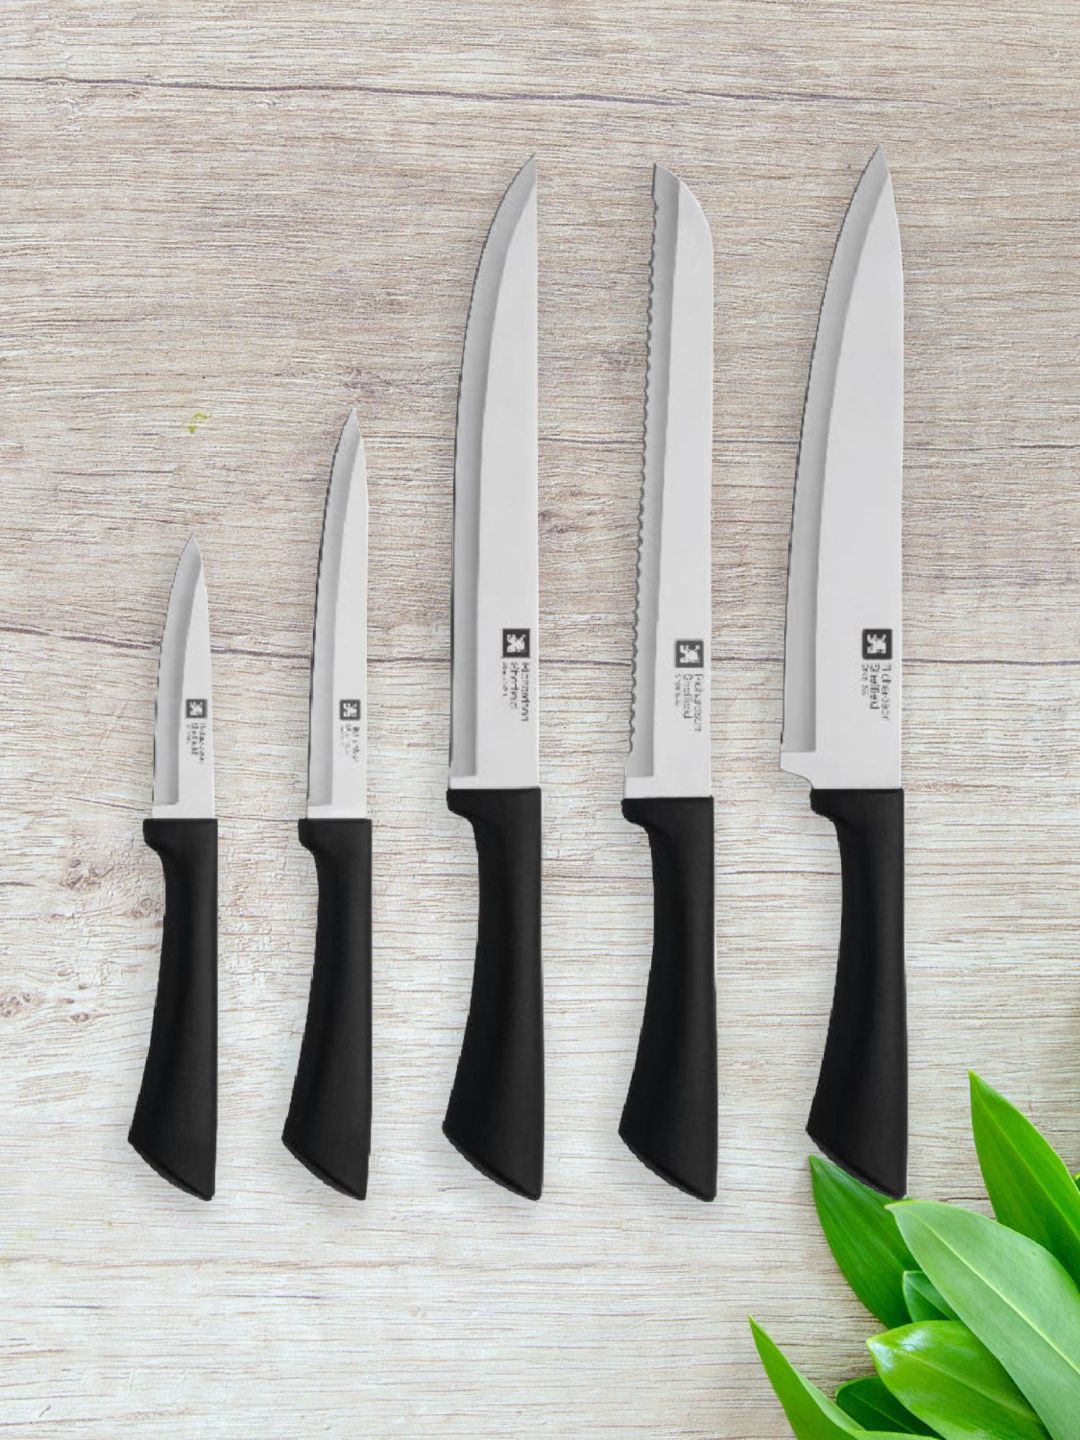 Richardson Sheffield Set Of 5 Black & Silver-Toned Stainless Steel Knife Set Price in India